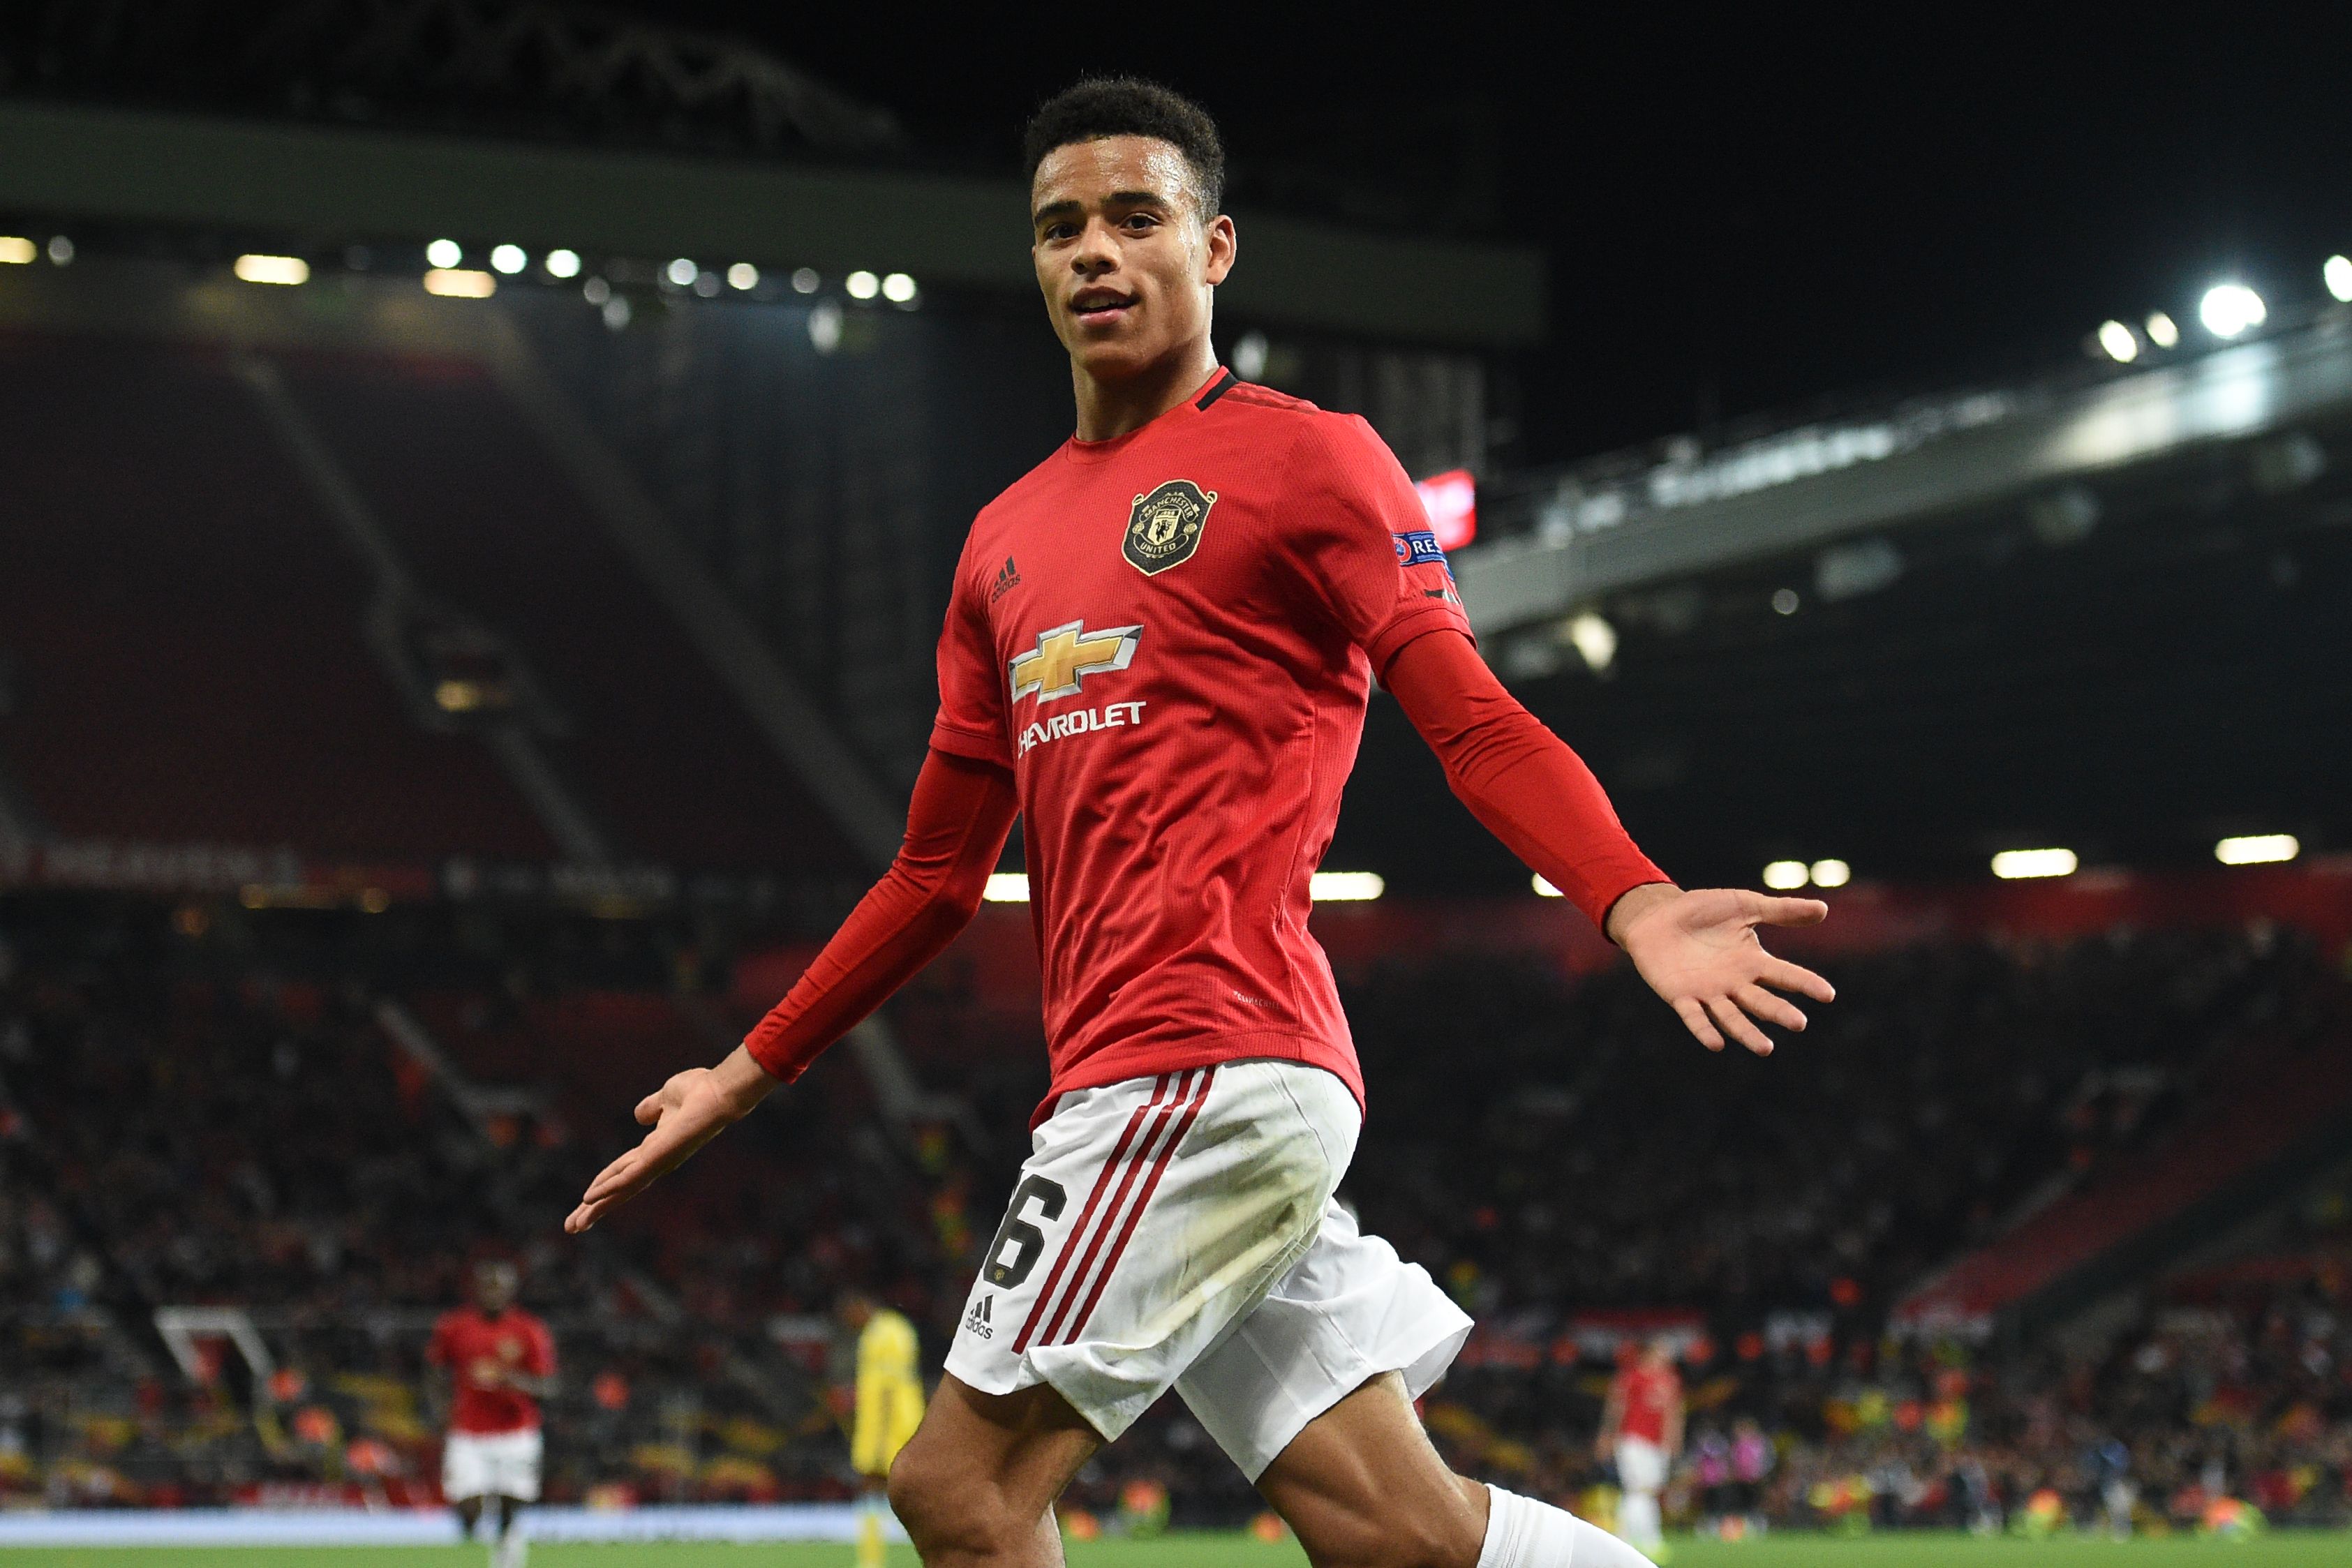 Mason Greenwood must let his game do the talking after recent off the field issues (Photo by Oli Scarff/AFP/Getty Images)